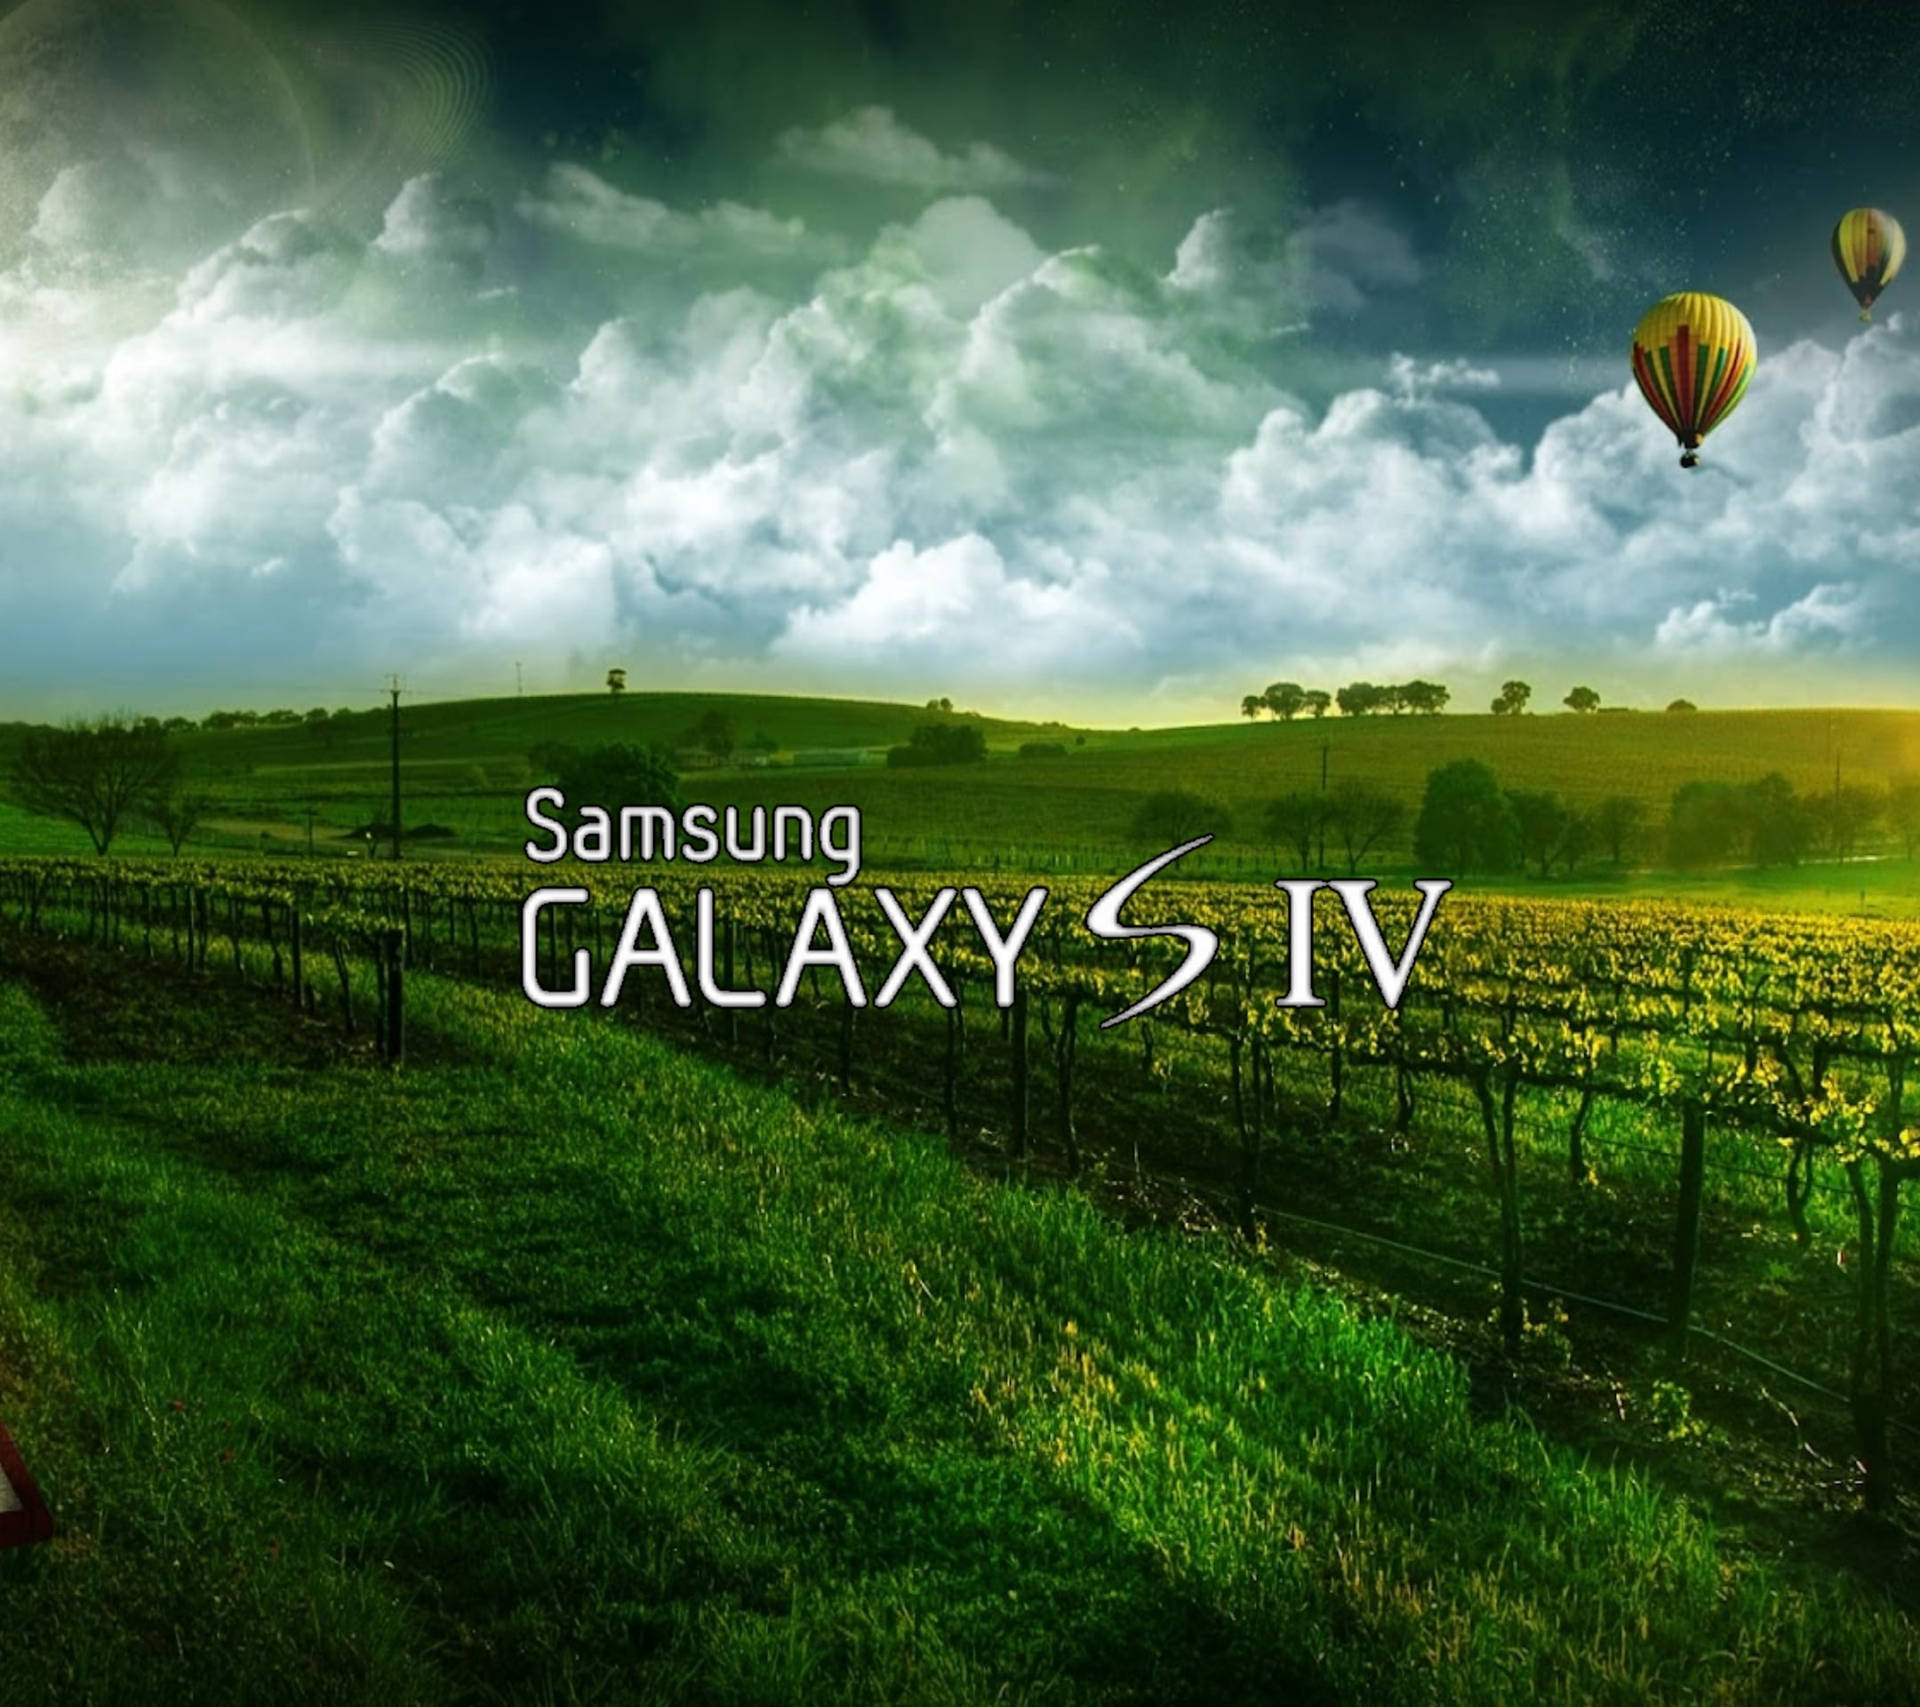 Samsung Galaxy S4 Pictures Wallpaper